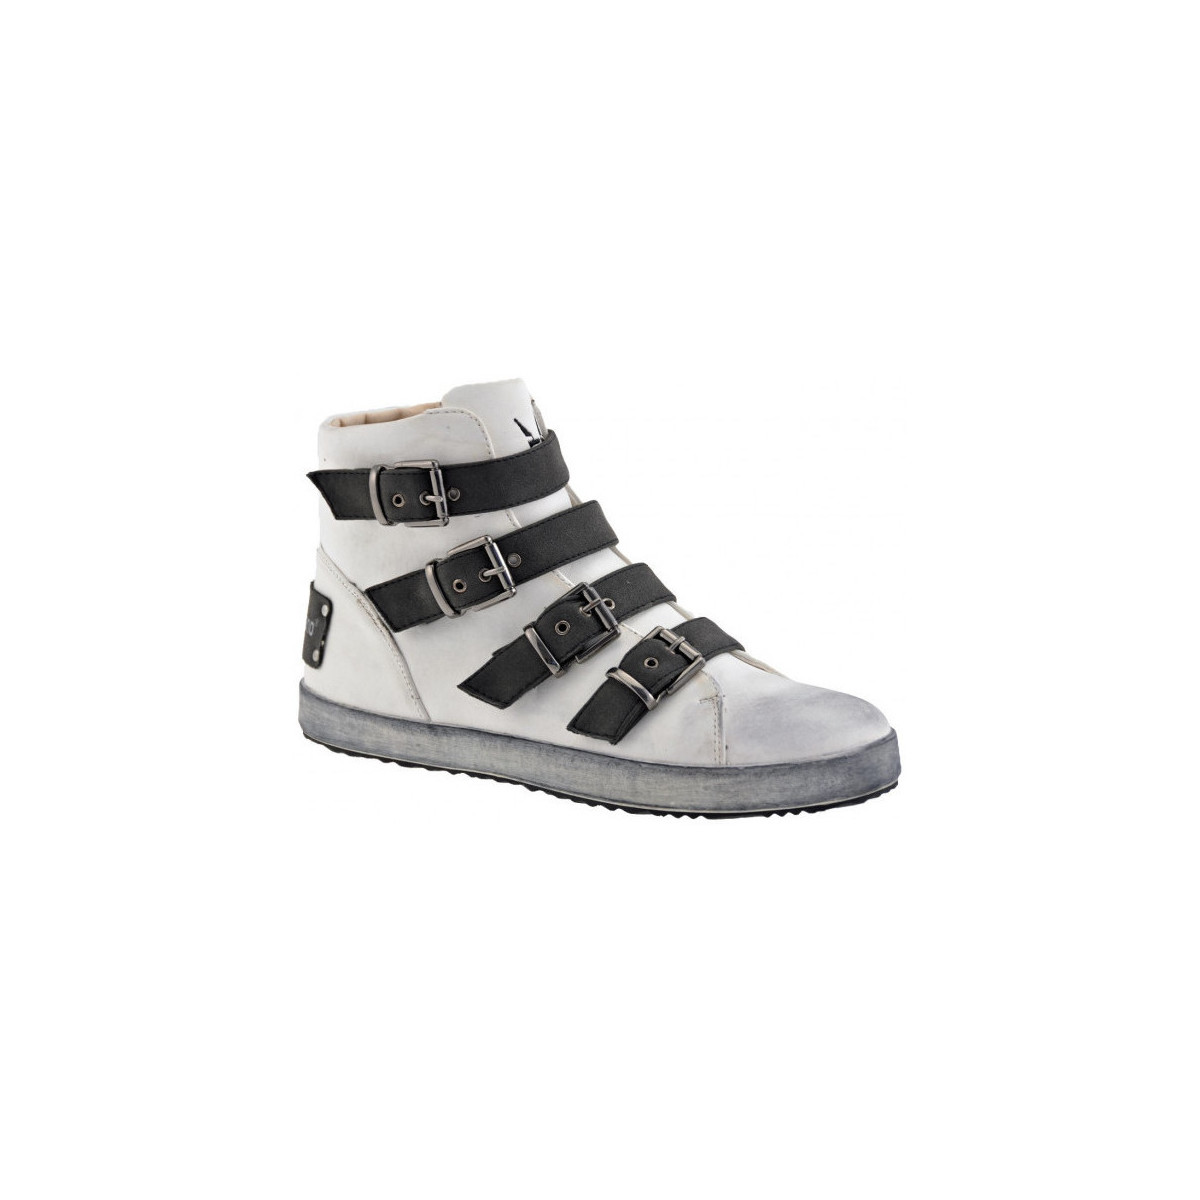 Chaussures Femme Baskets mode F. Milano Trendy Blanc